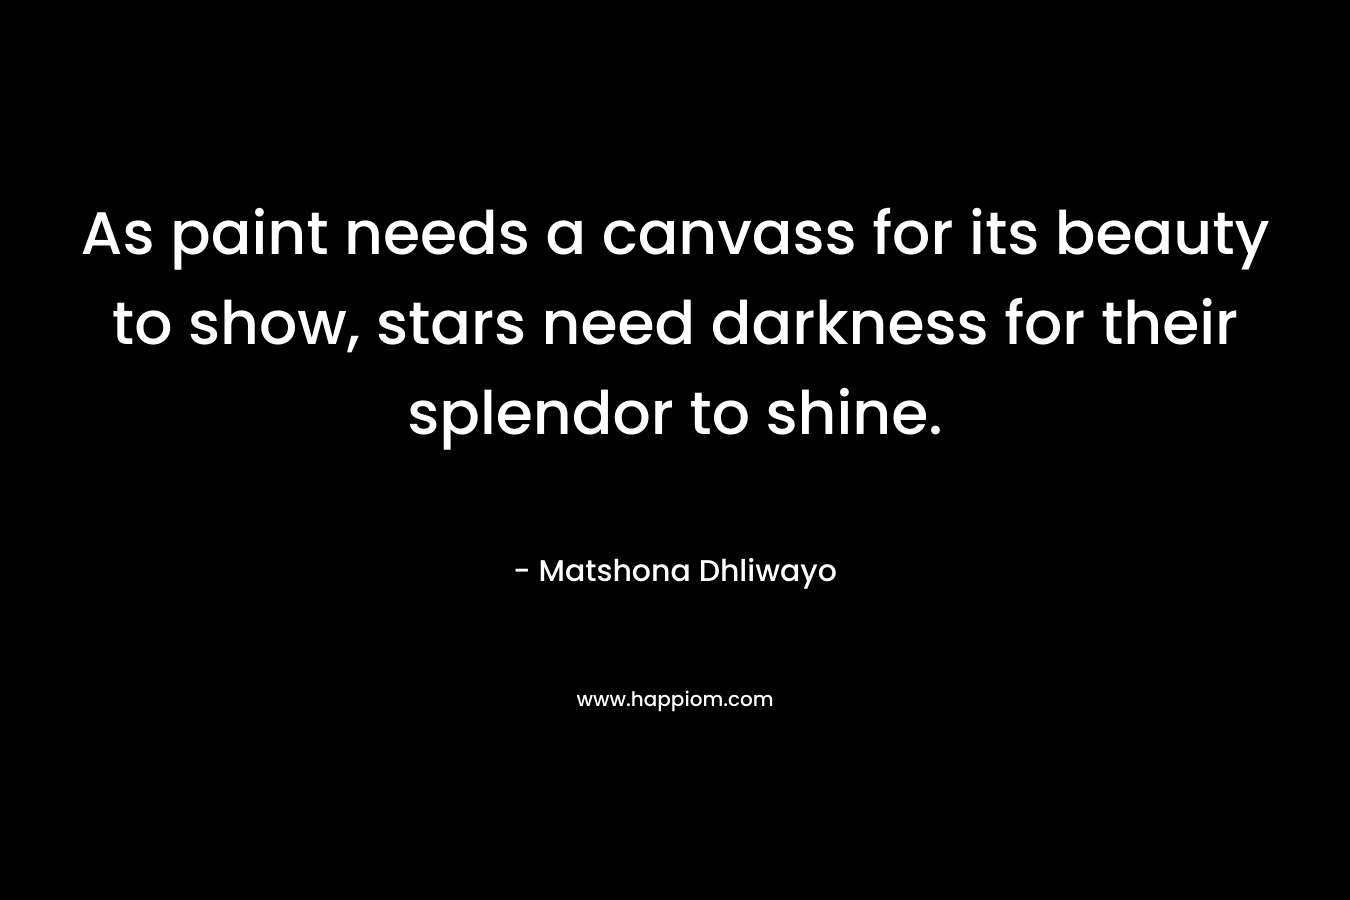 As paint needs a canvass for its beauty to show, stars need darkness for their splendor to shine.